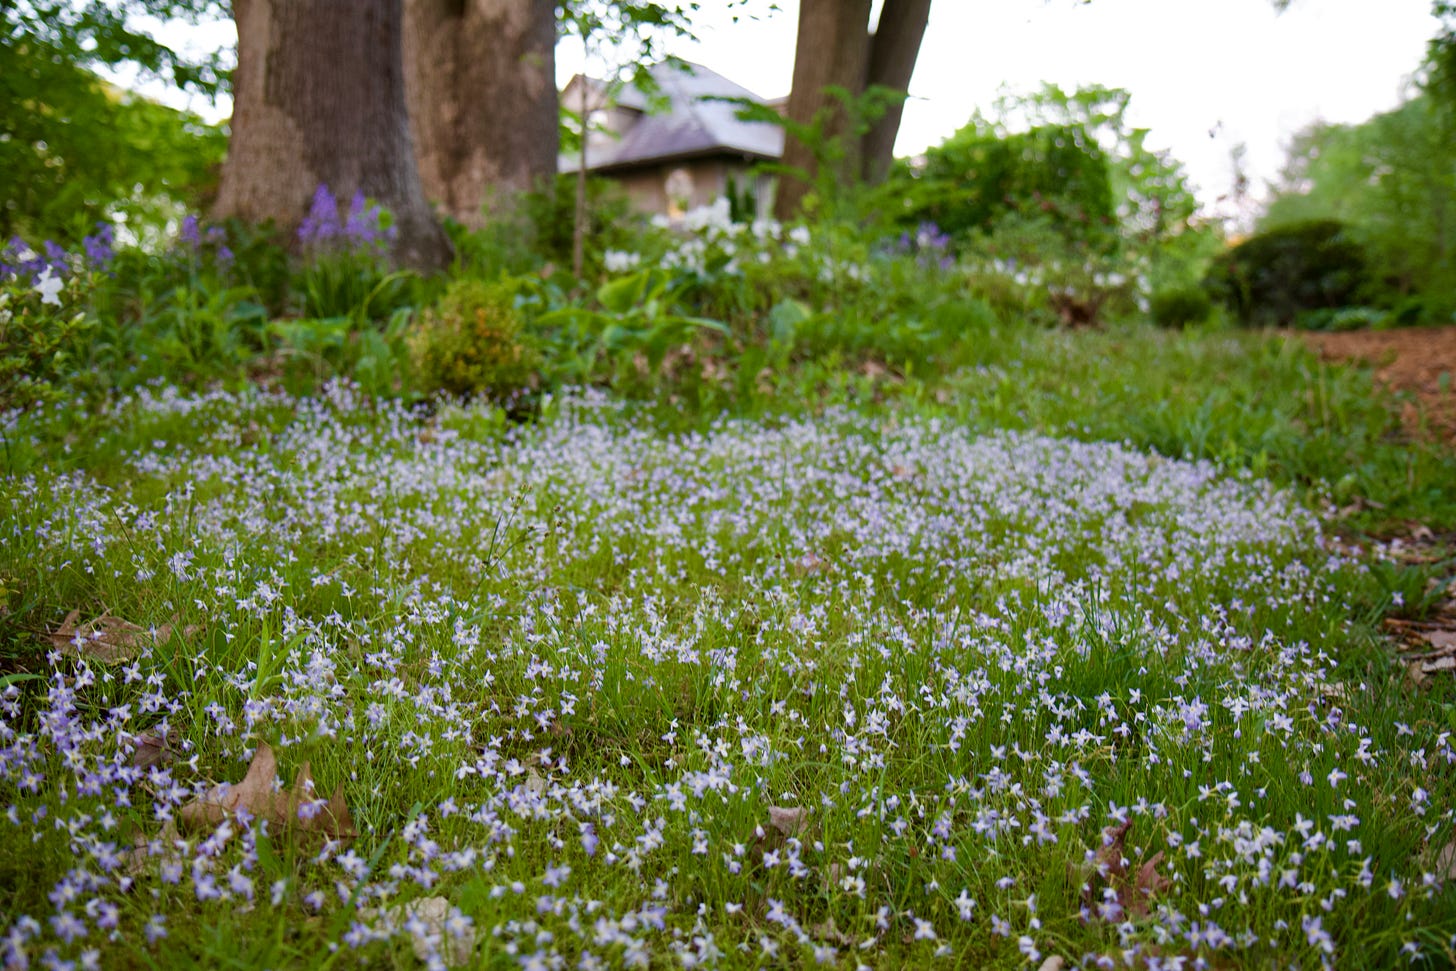 Our patch of Bluets is now growing year after year since I learned their trick—keeping the moss areas where they grow totally swept clean of leaves and debris. 